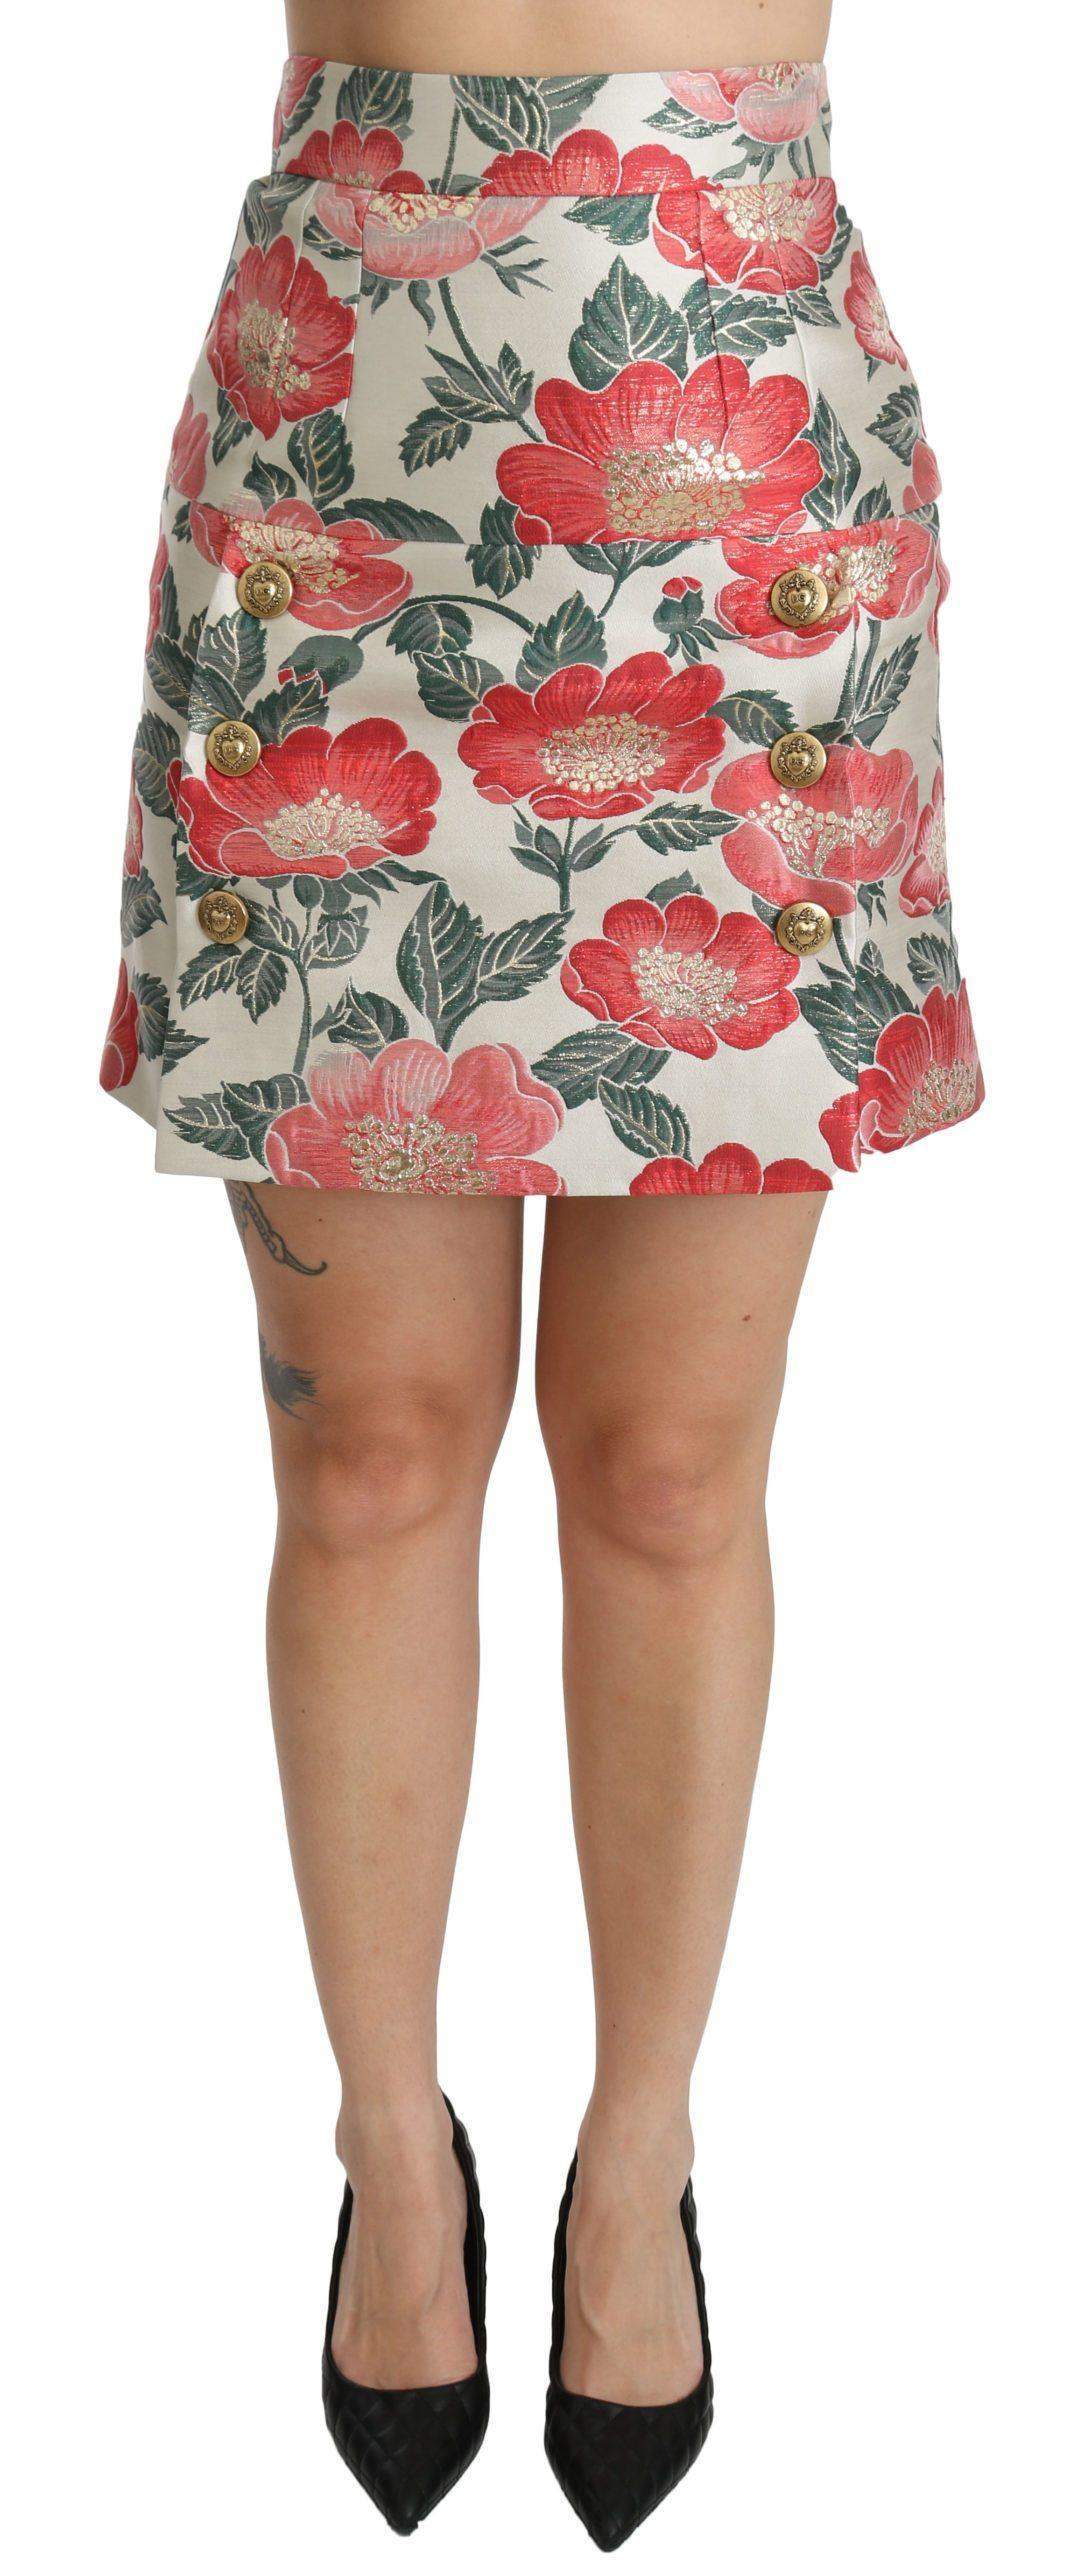 Dolce & Gabbana  White Green Red Floral High Waist Mini Skirt #women, Brand_Dolce & Gabbana, Catch, Dolce & Gabbana, feed-agegroup-adult, feed-color-white, feed-gender-female, feed-size-IT36 | XS, feed-size-IT38|XS, feed-size-IT40|S, feed-size-IT42|M, feed-size-IT44|L, feed-size-IT46|XL, feed-size-IT48|XXL, Gender_Women, IT36 | XS, IT38|XS, IT40|S, IT42|M, IT44|L, IT46|XL, IT48|XXL, Kogan, Skirts - Women - Clothing, White, Women - New Arrivals at SEYMAYKA